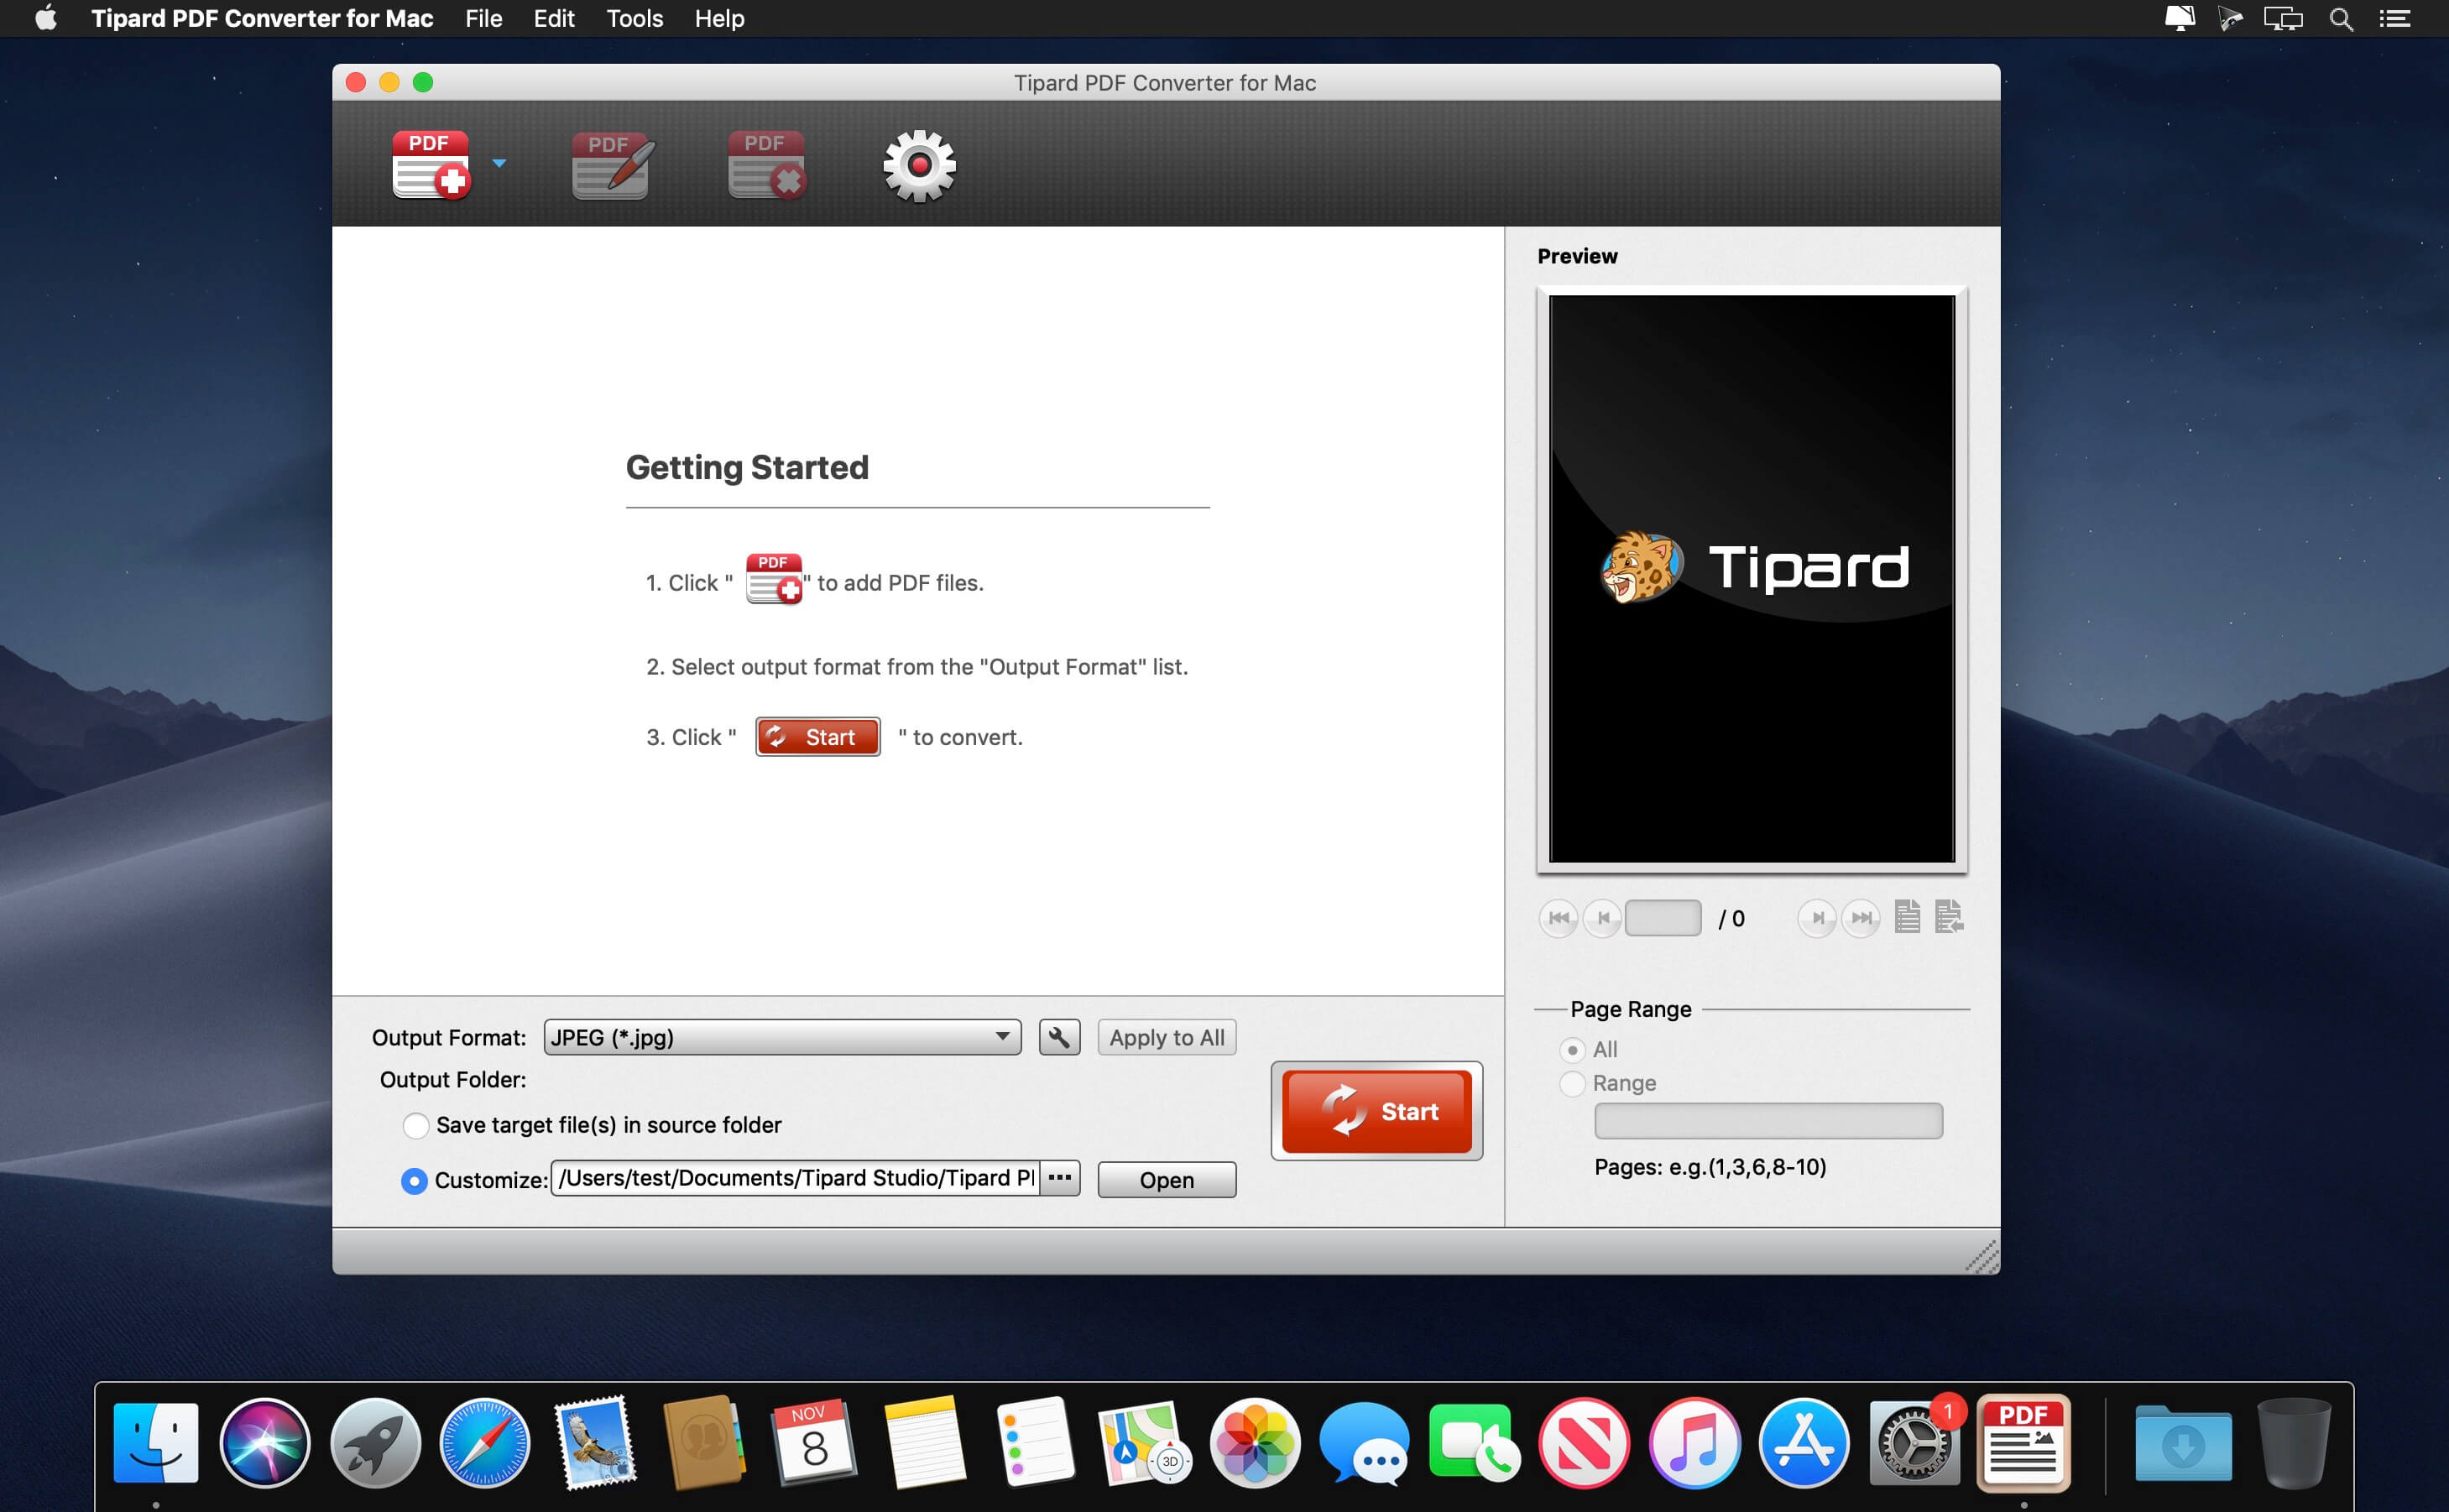 instal the new for ios Tipard Video Converter Ultimate 10.3.38